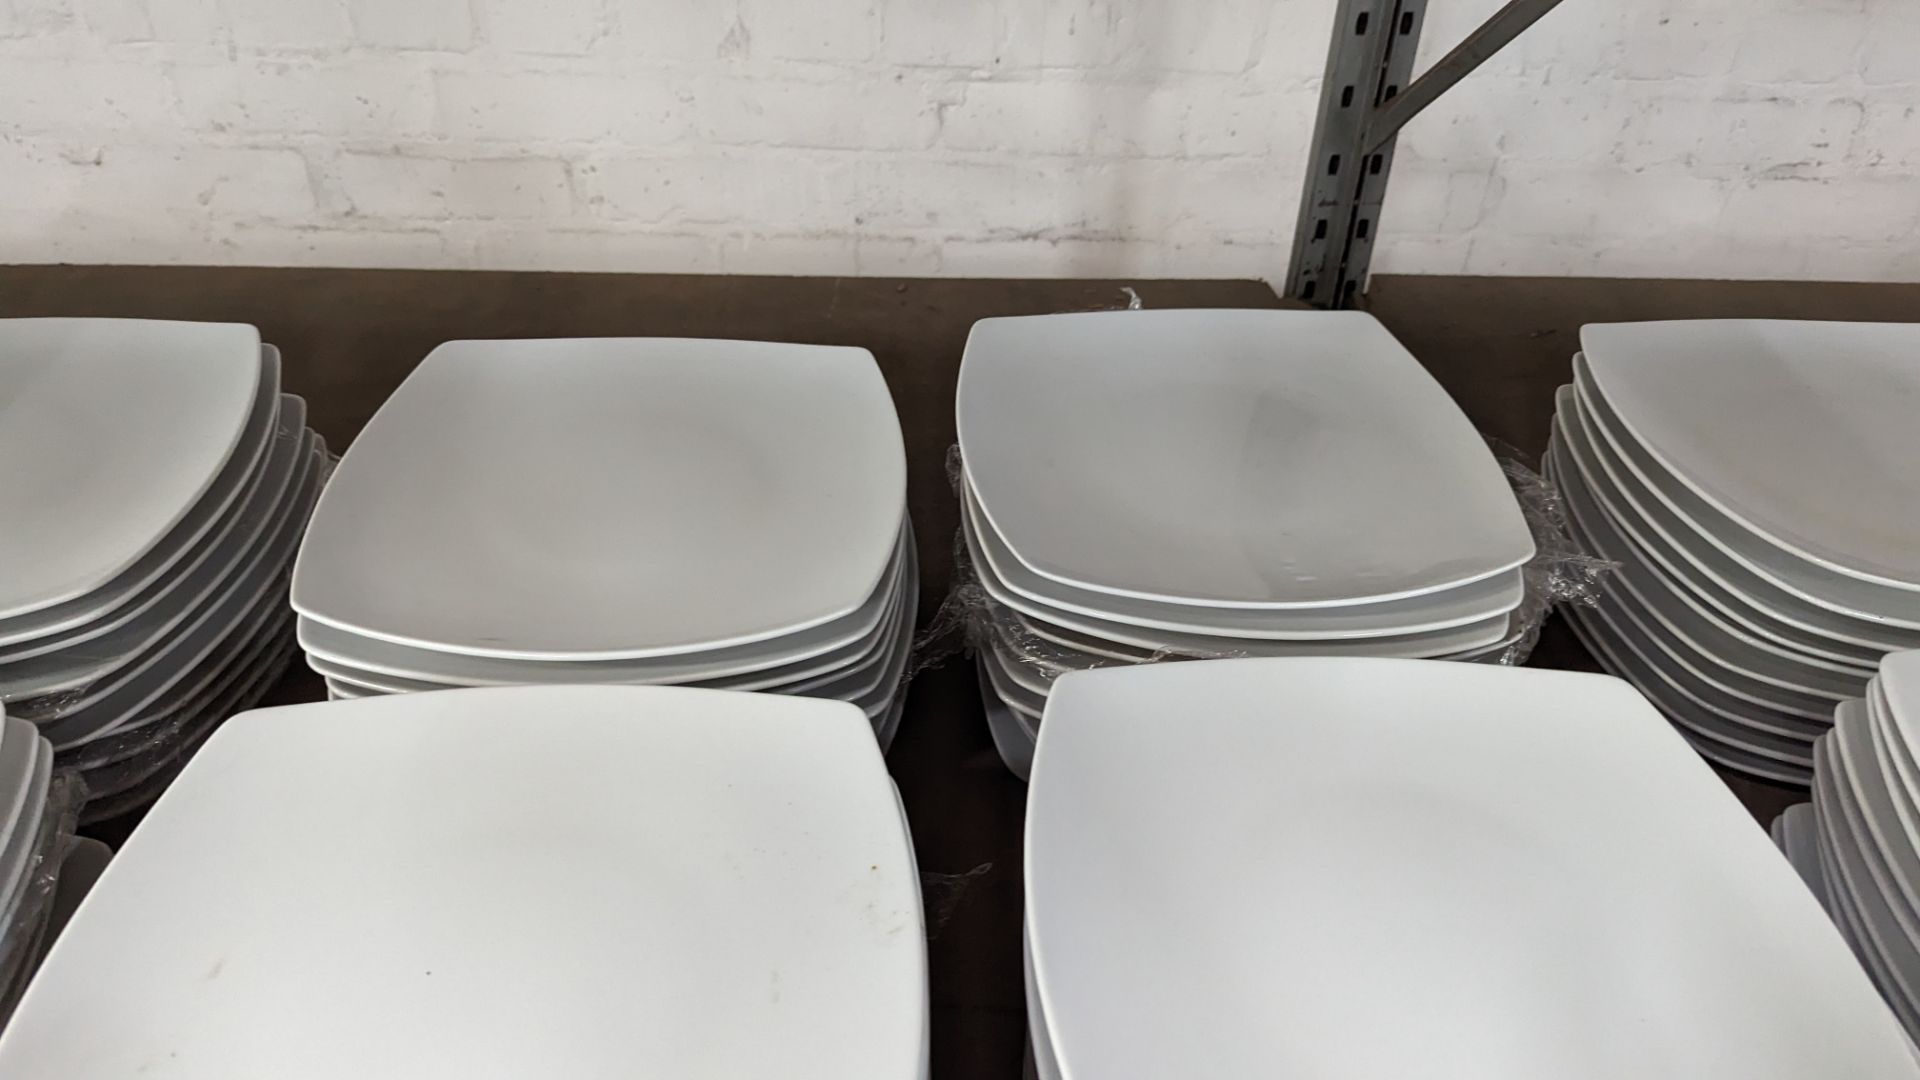 60 off white "squarish" plates with curved sides, each measuring approximately 255mm square - 6 stac - Image 5 of 6